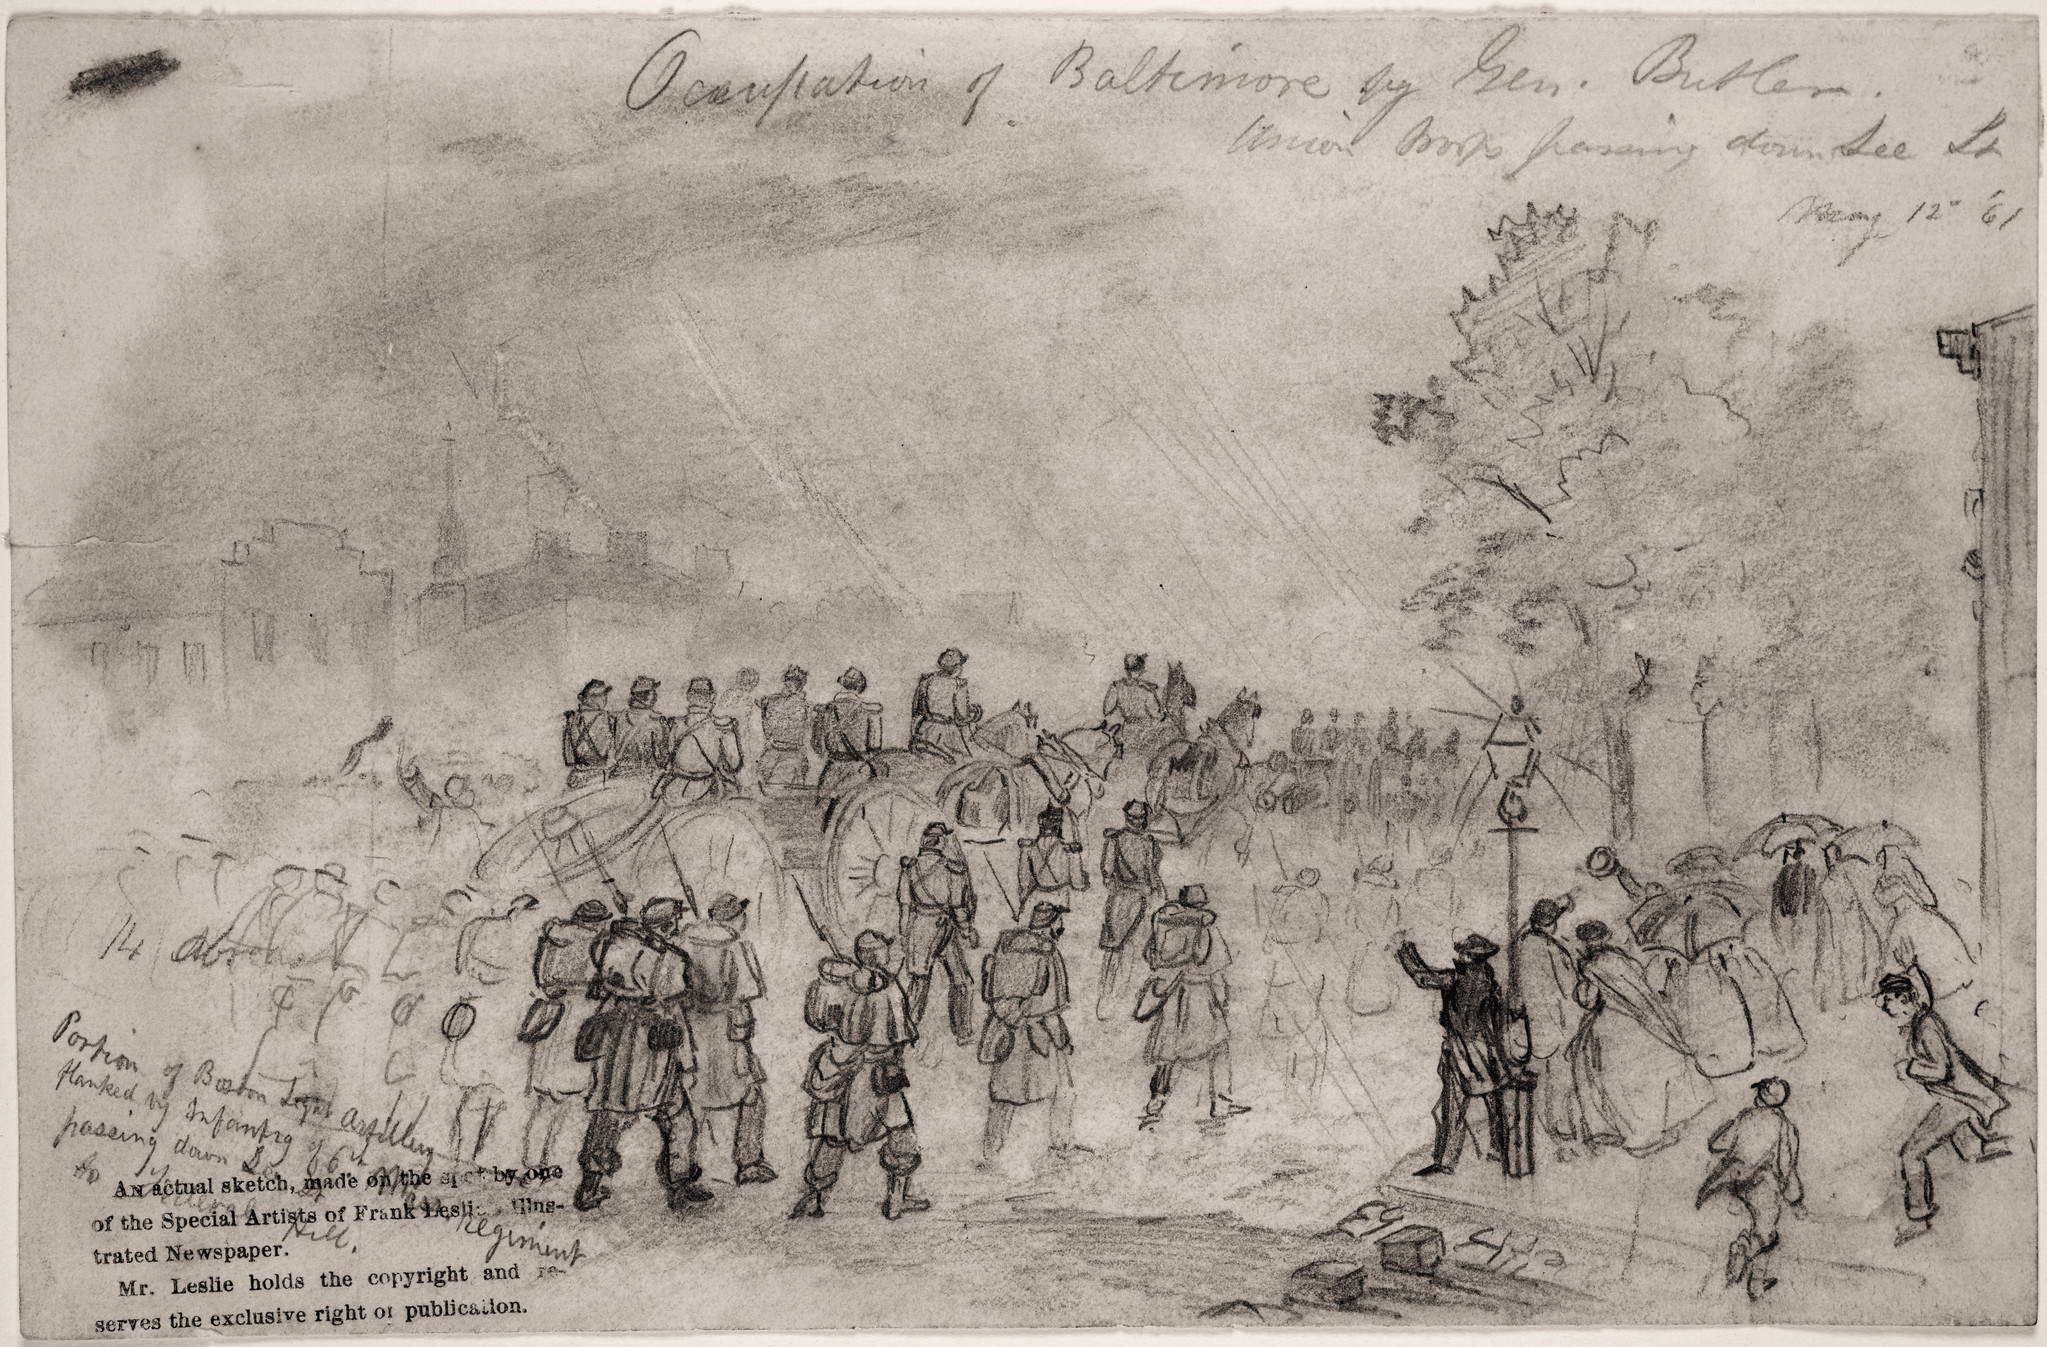 Occupation of Baltimore by General Butler. Union troops passing down Lee Street, May 12, 1861. Portion of Boston artillery flanked by Infantry of the 6th Mass. regiment to Federal Hill